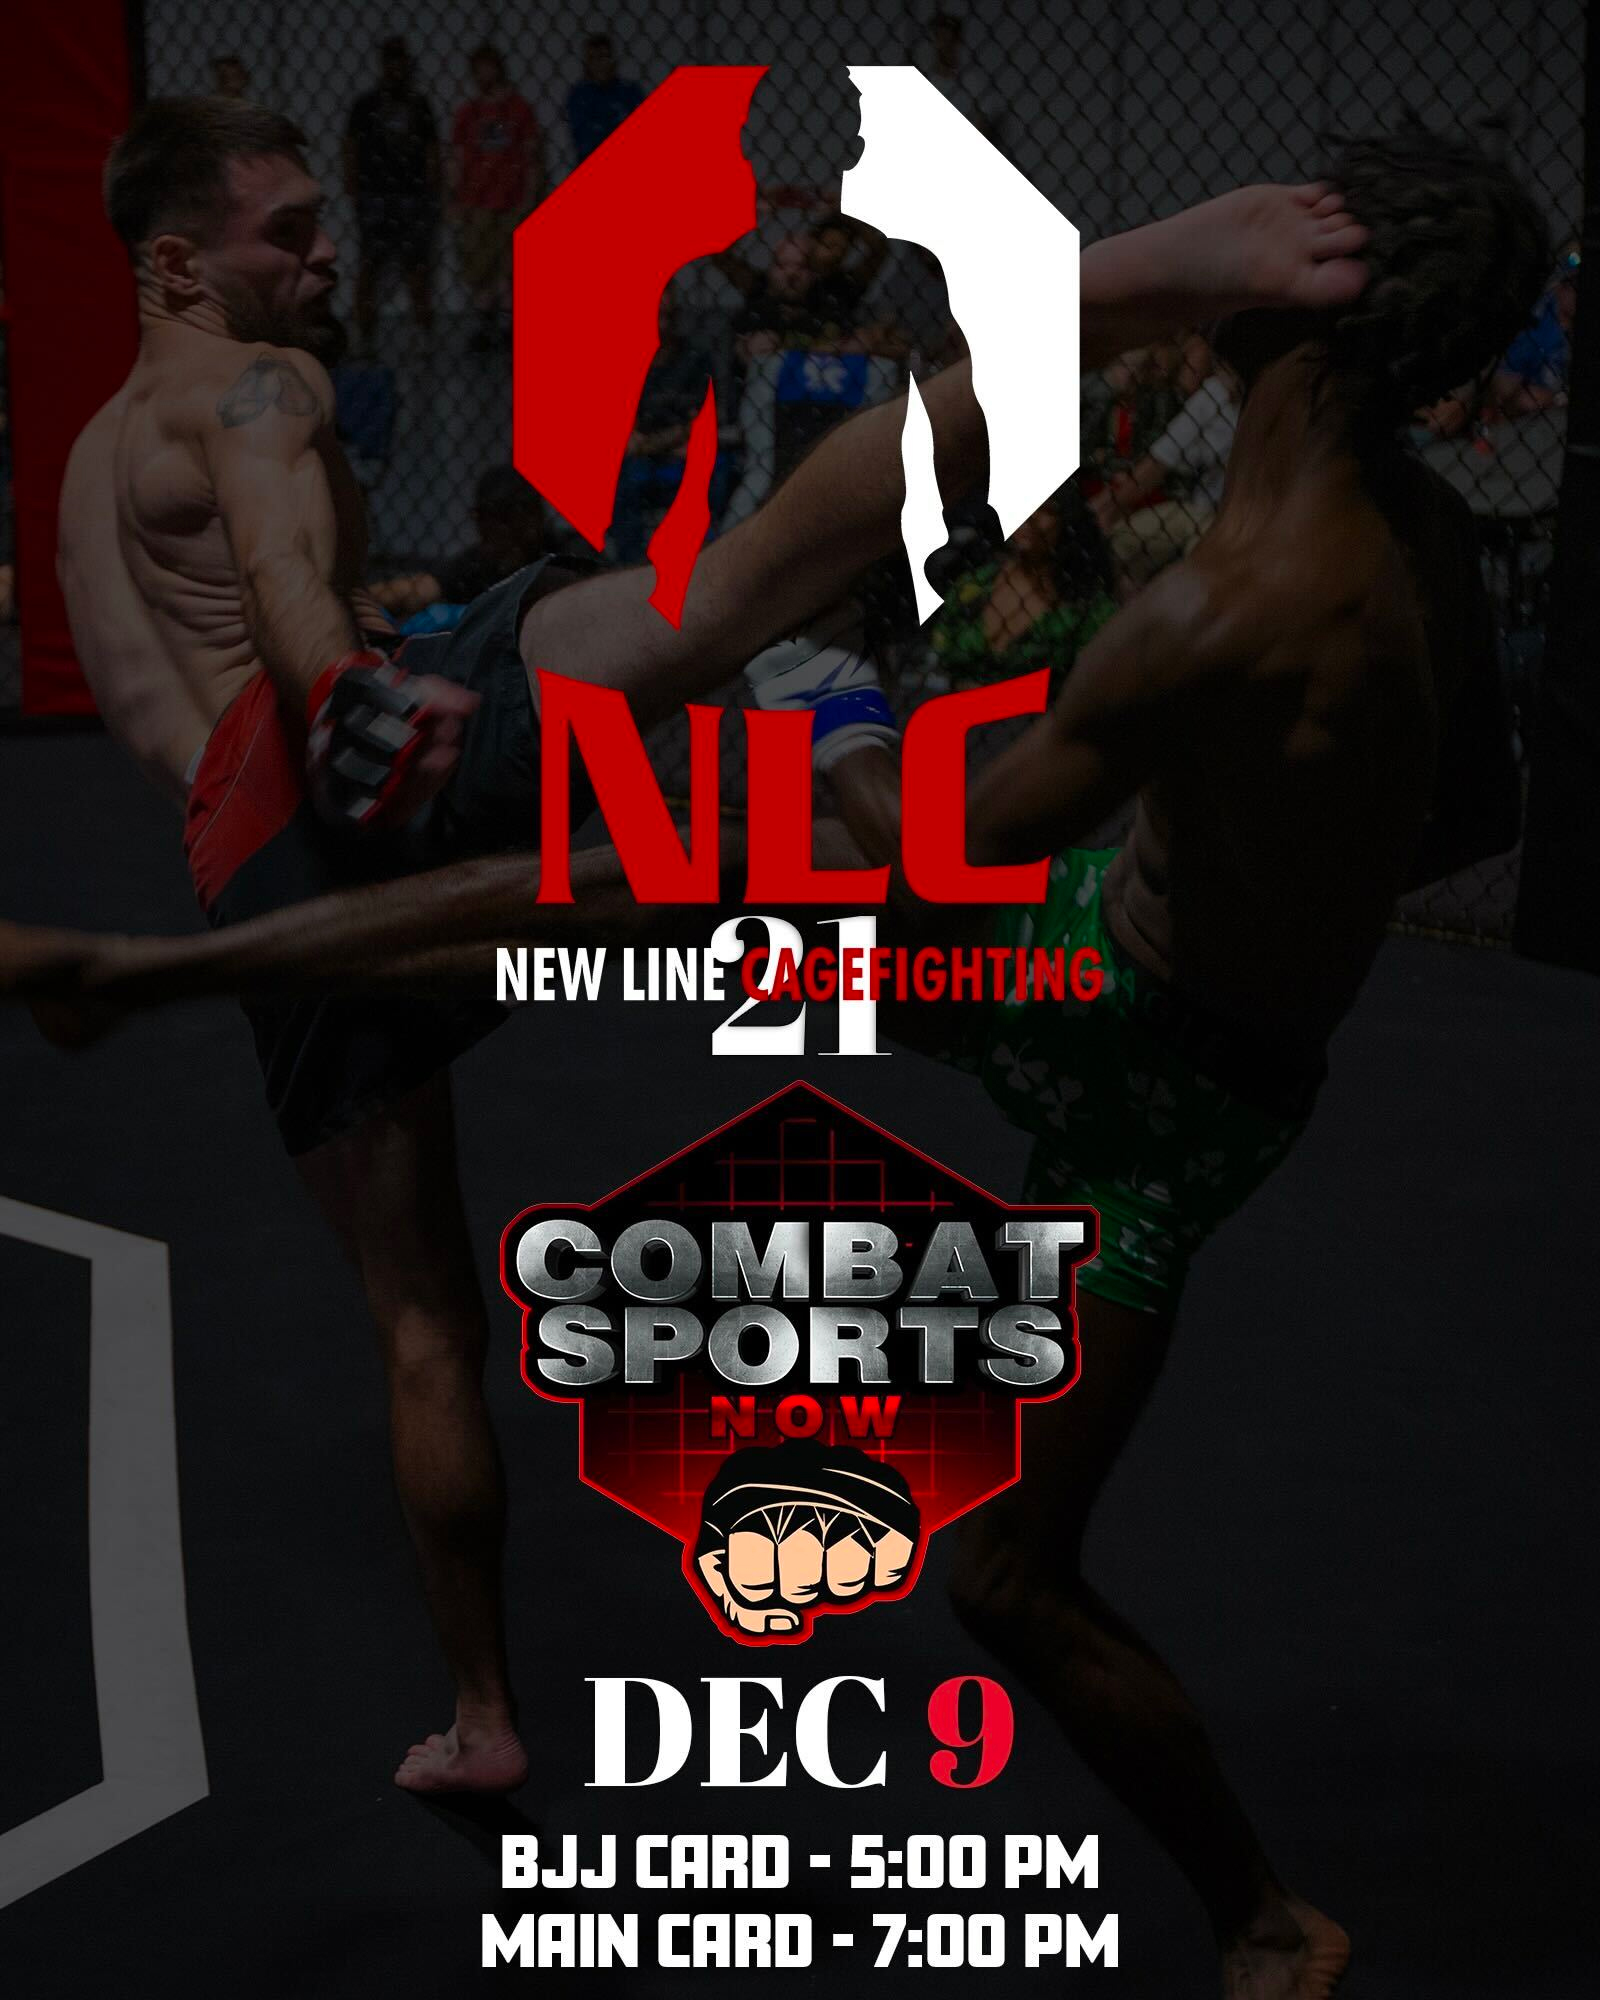 New Line Cagefighting 21 Live on Combat Sports Now